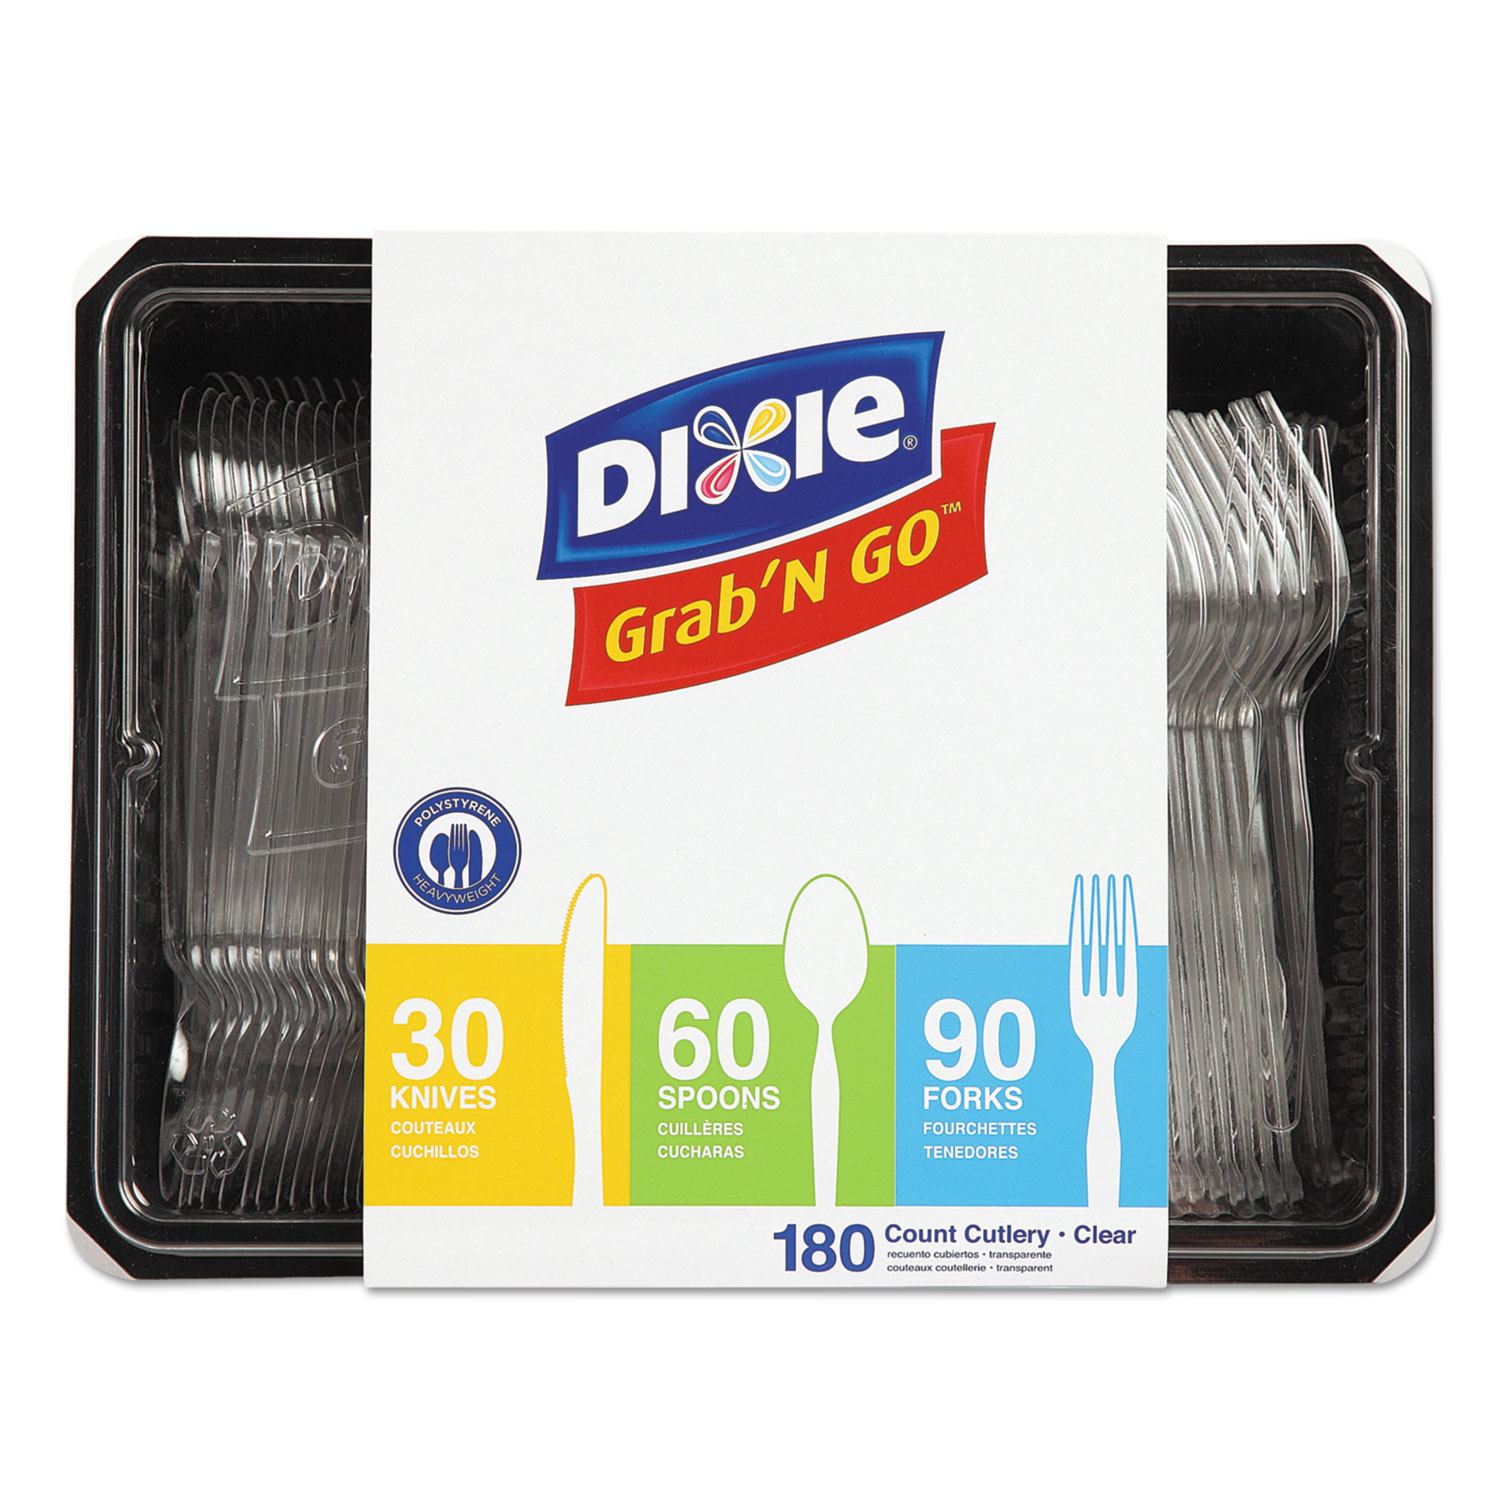  Dixie CH0369DX7 Combo Pack, Tray with Clear Plastic Utensils, 90 Forks, 30 Knives, 60 Spoons (DXECH0369DX7PK) 